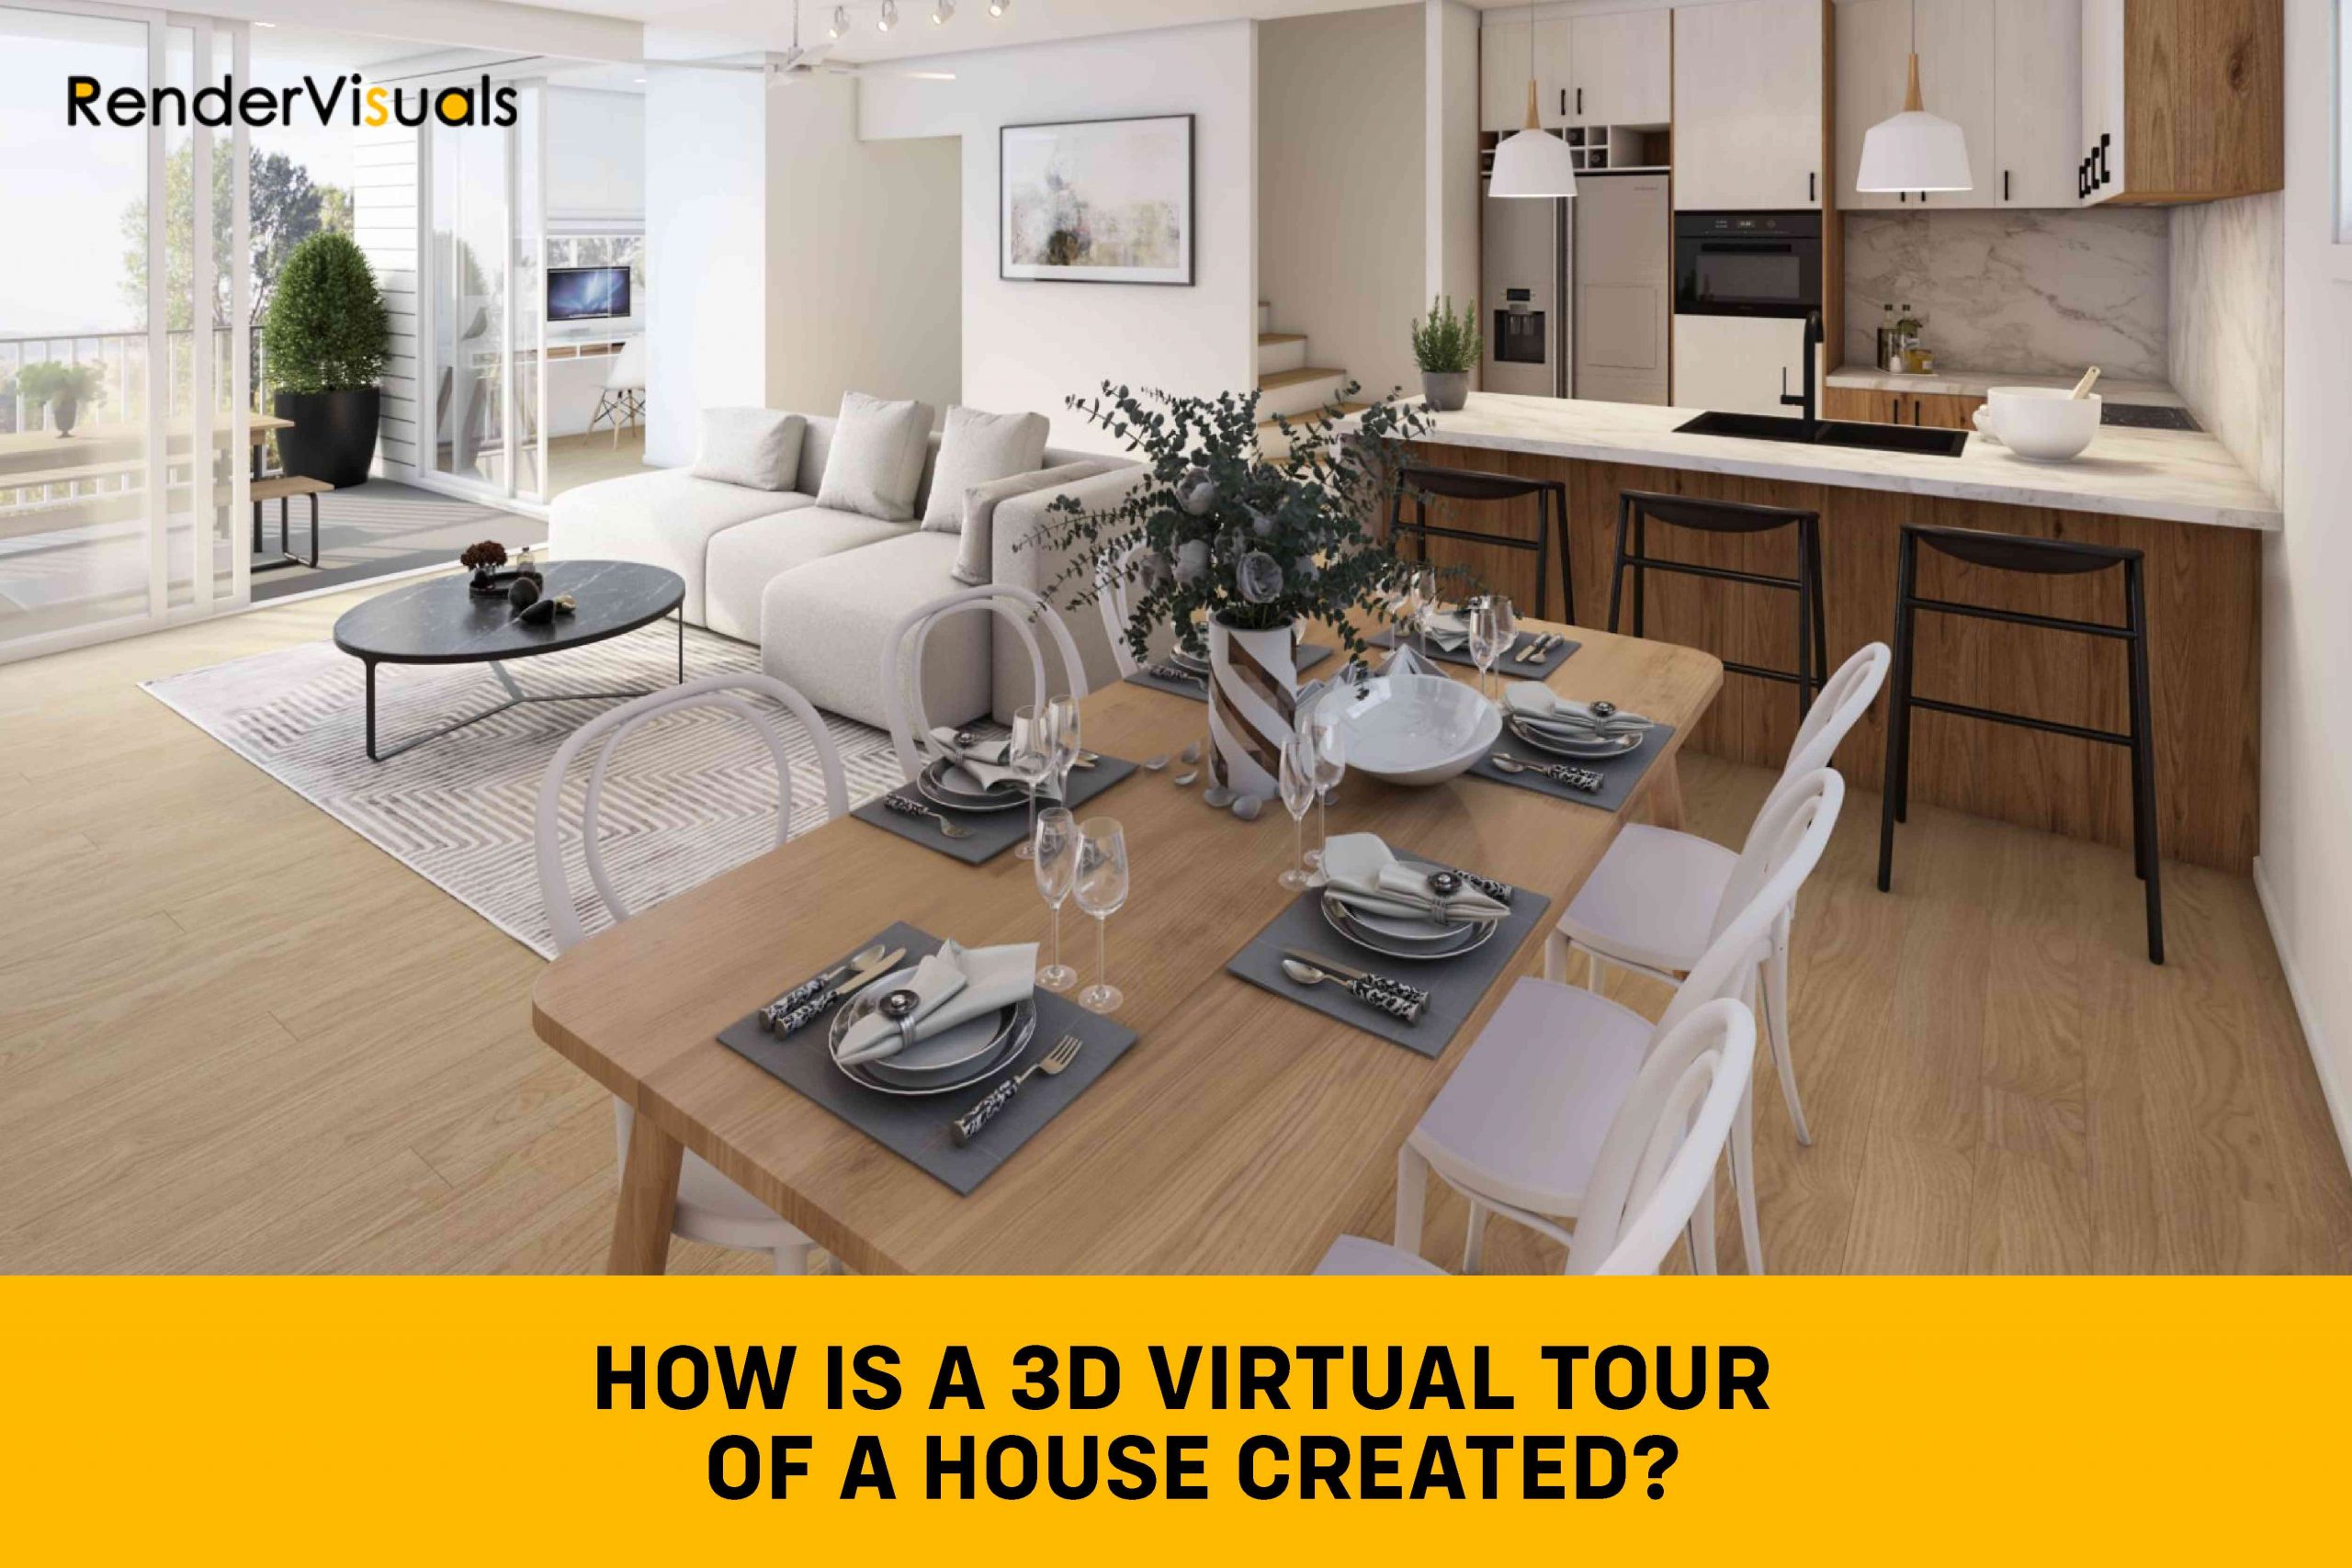 How Is a 3D Virtual Tour of a House Created?